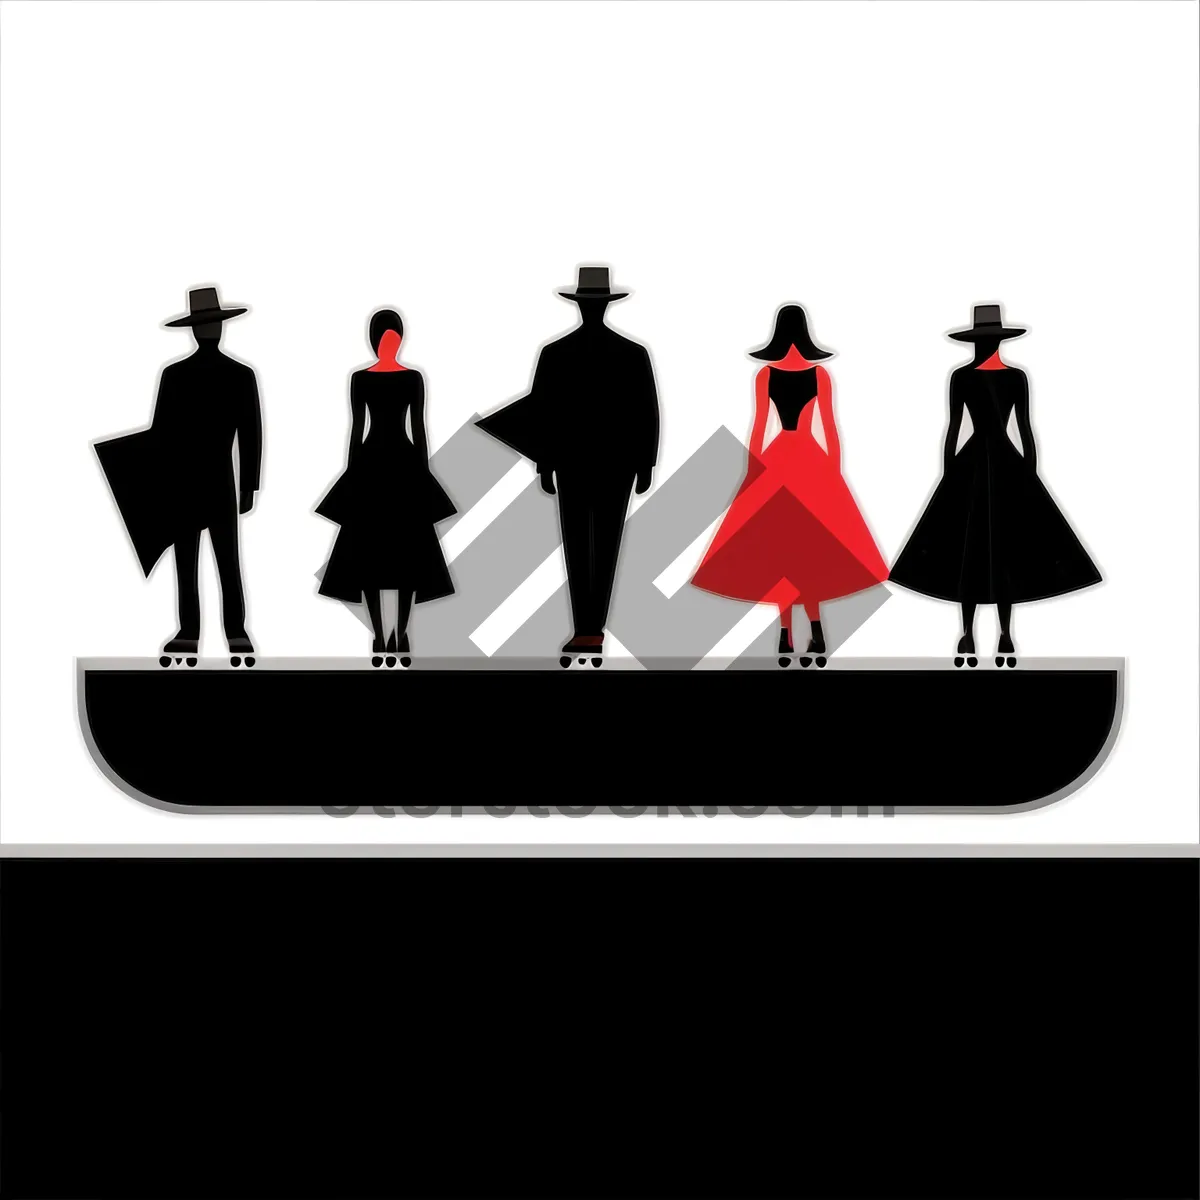 Picture of Black Silhouettes of Men and Women in Group